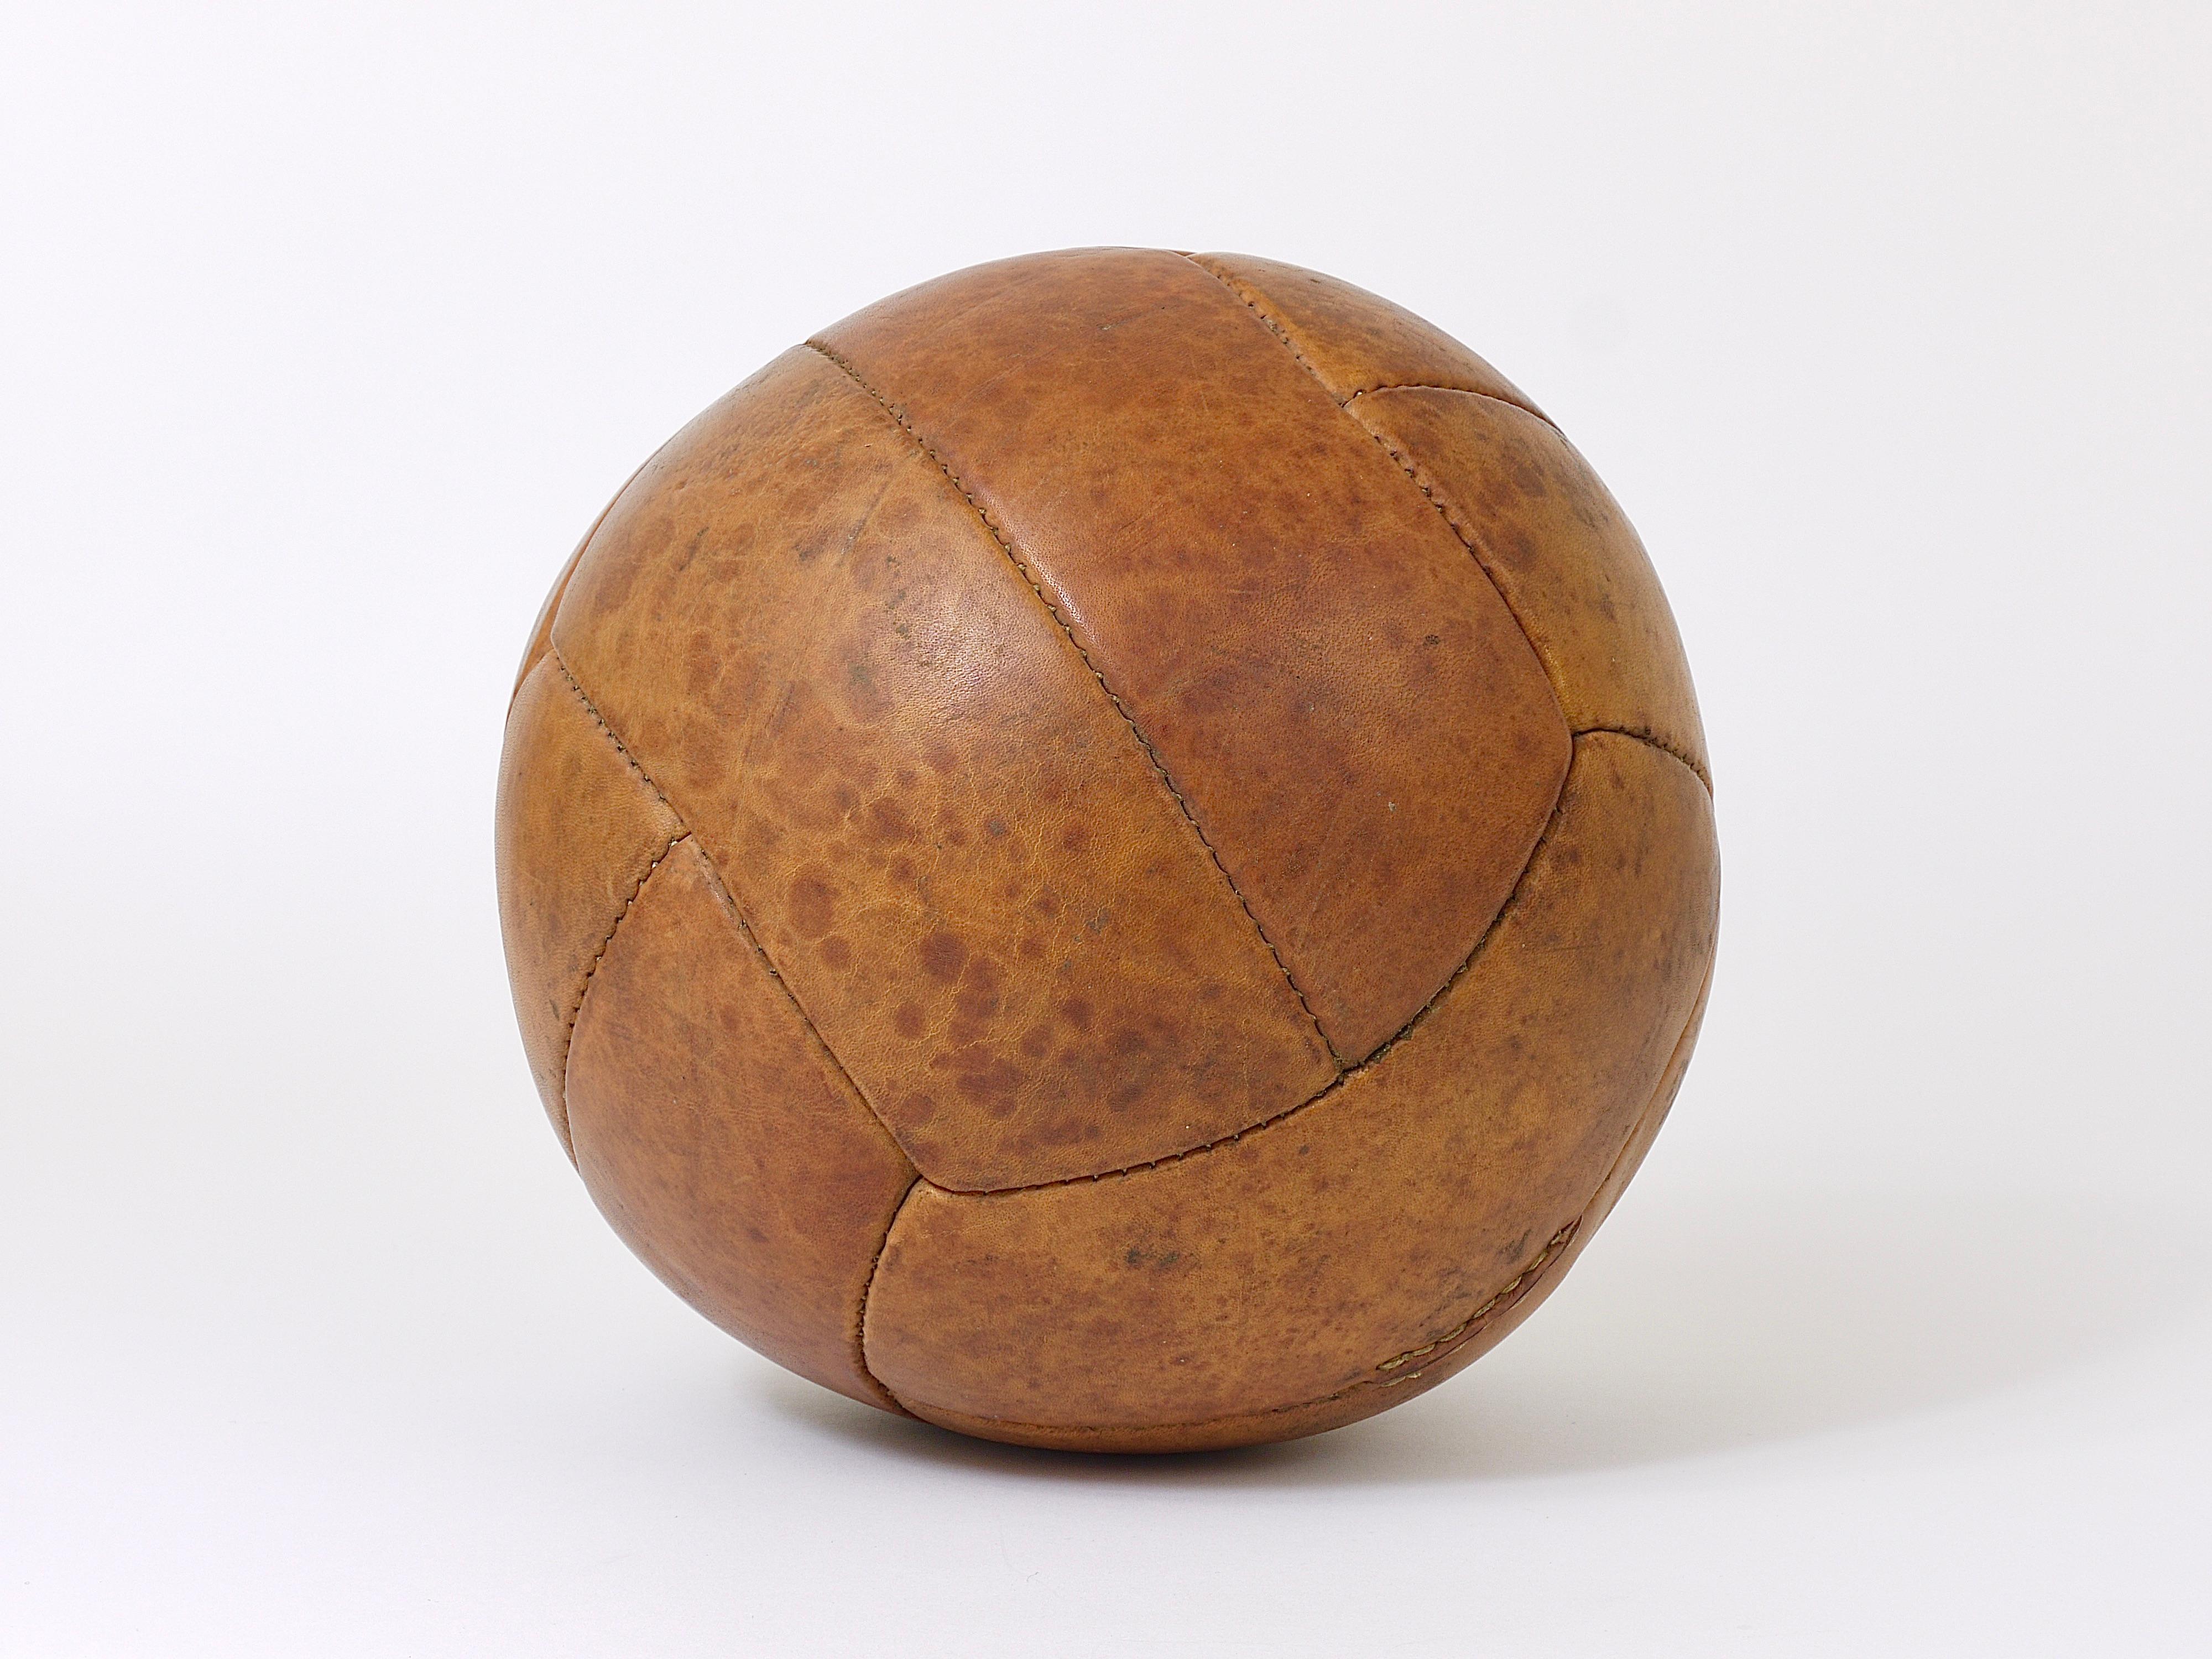 Vintage 1930s Tan Leather Medicine Ball from a Gym, Czech Republic, 1930s 1